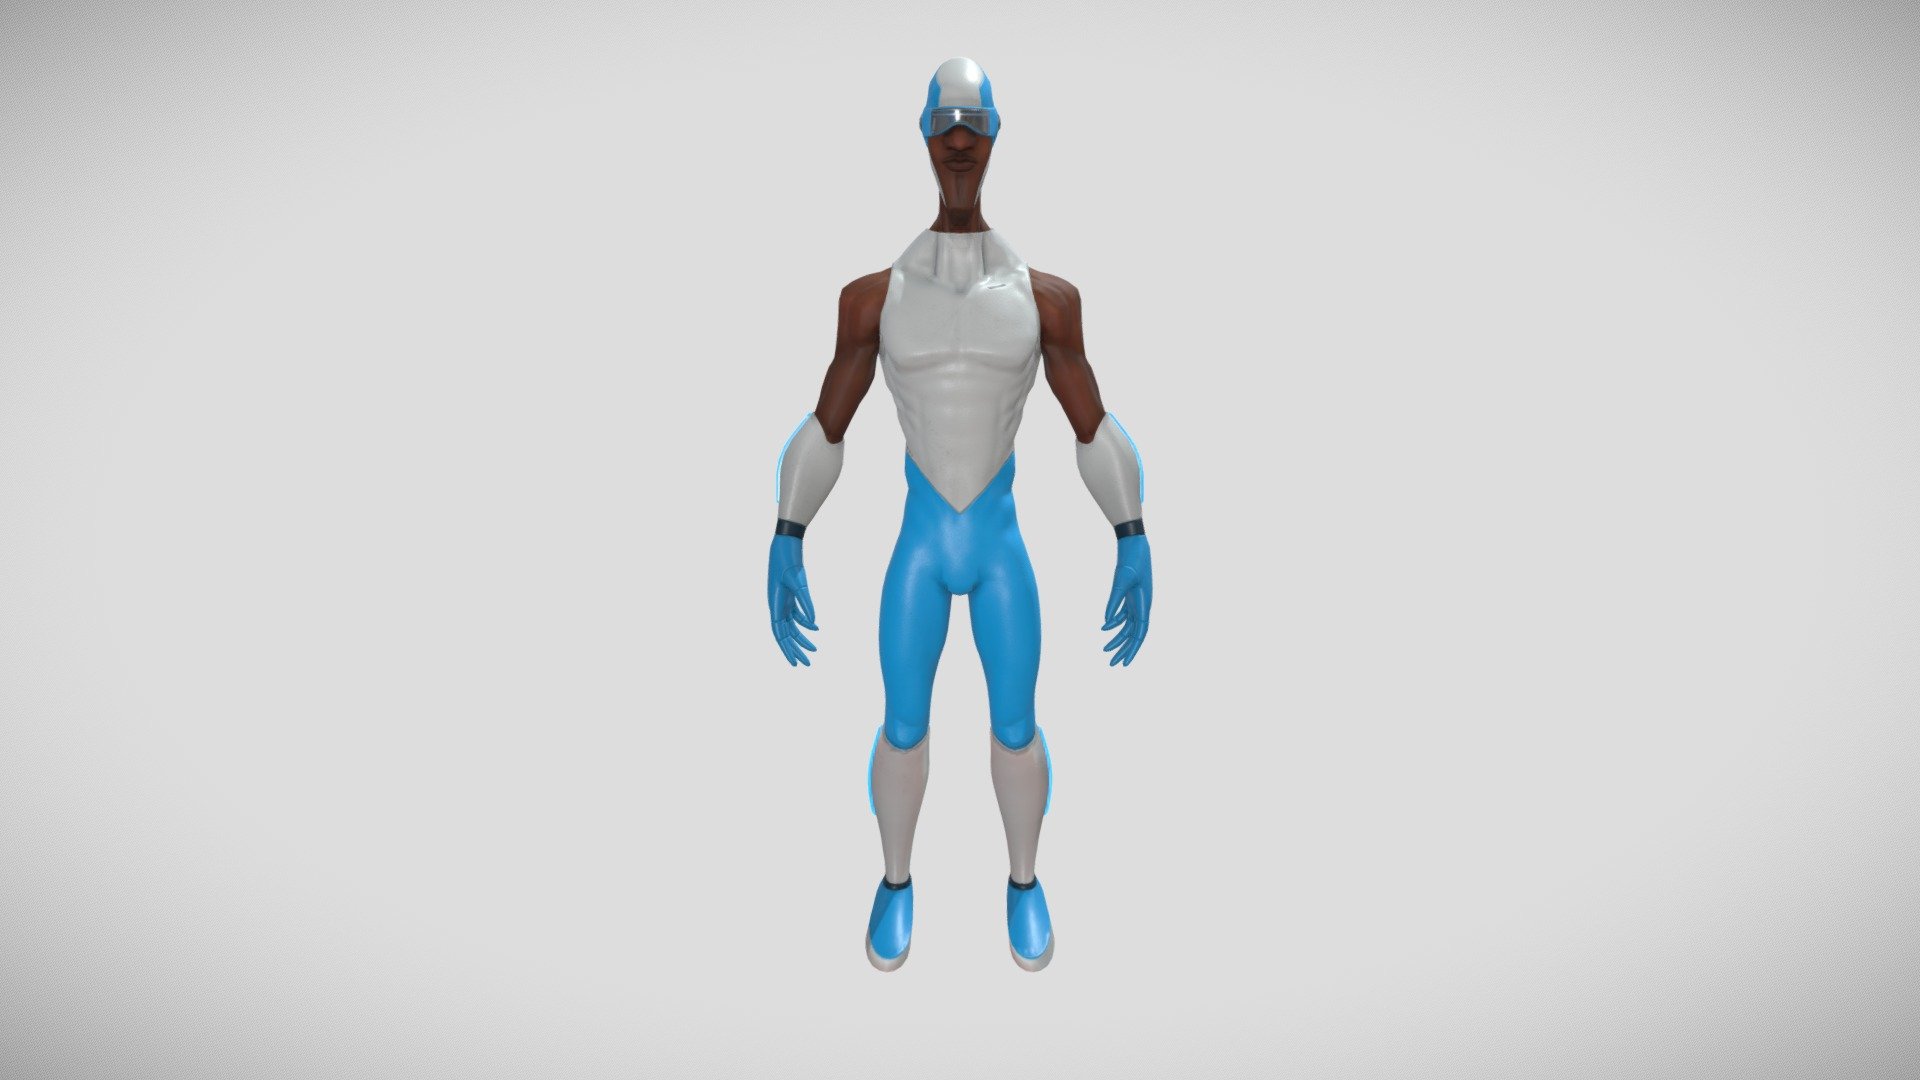 Hey ! 
This my 3D cartoon version of Frozone (a character from The Incredibles). 
You can see more content of Frozone on LinkedIn : https://www.linkedin.com/in/vadauh-d-ab9b5a122/

Have a good day :) - FREEZE ! - 3D model by vadauh 3d model